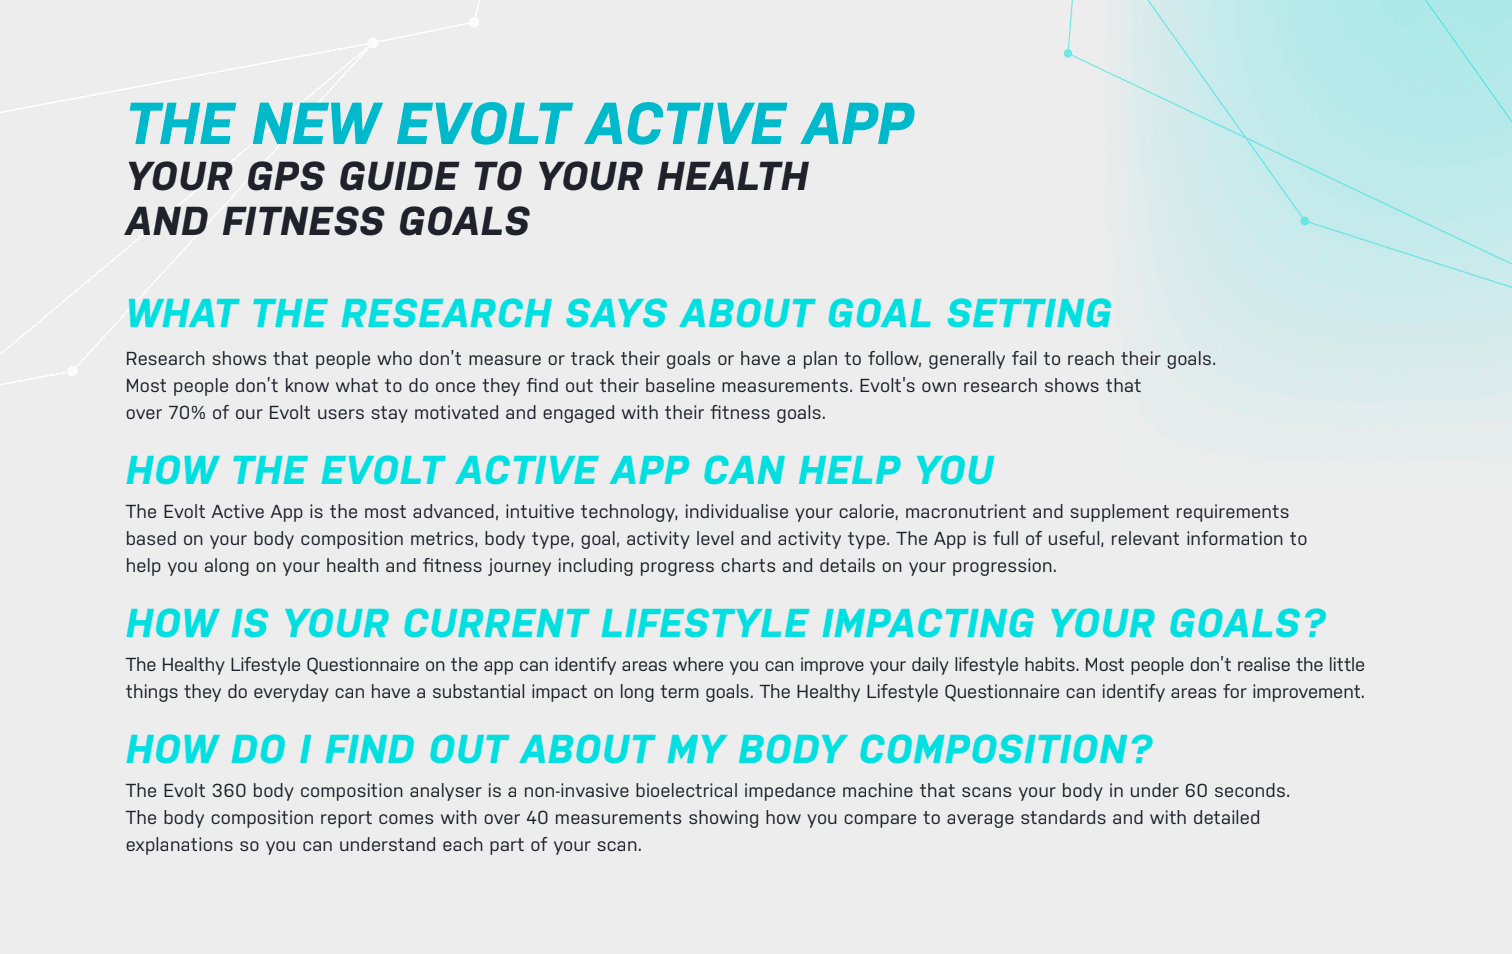 Evolt launches new mobile app for easy access to health and